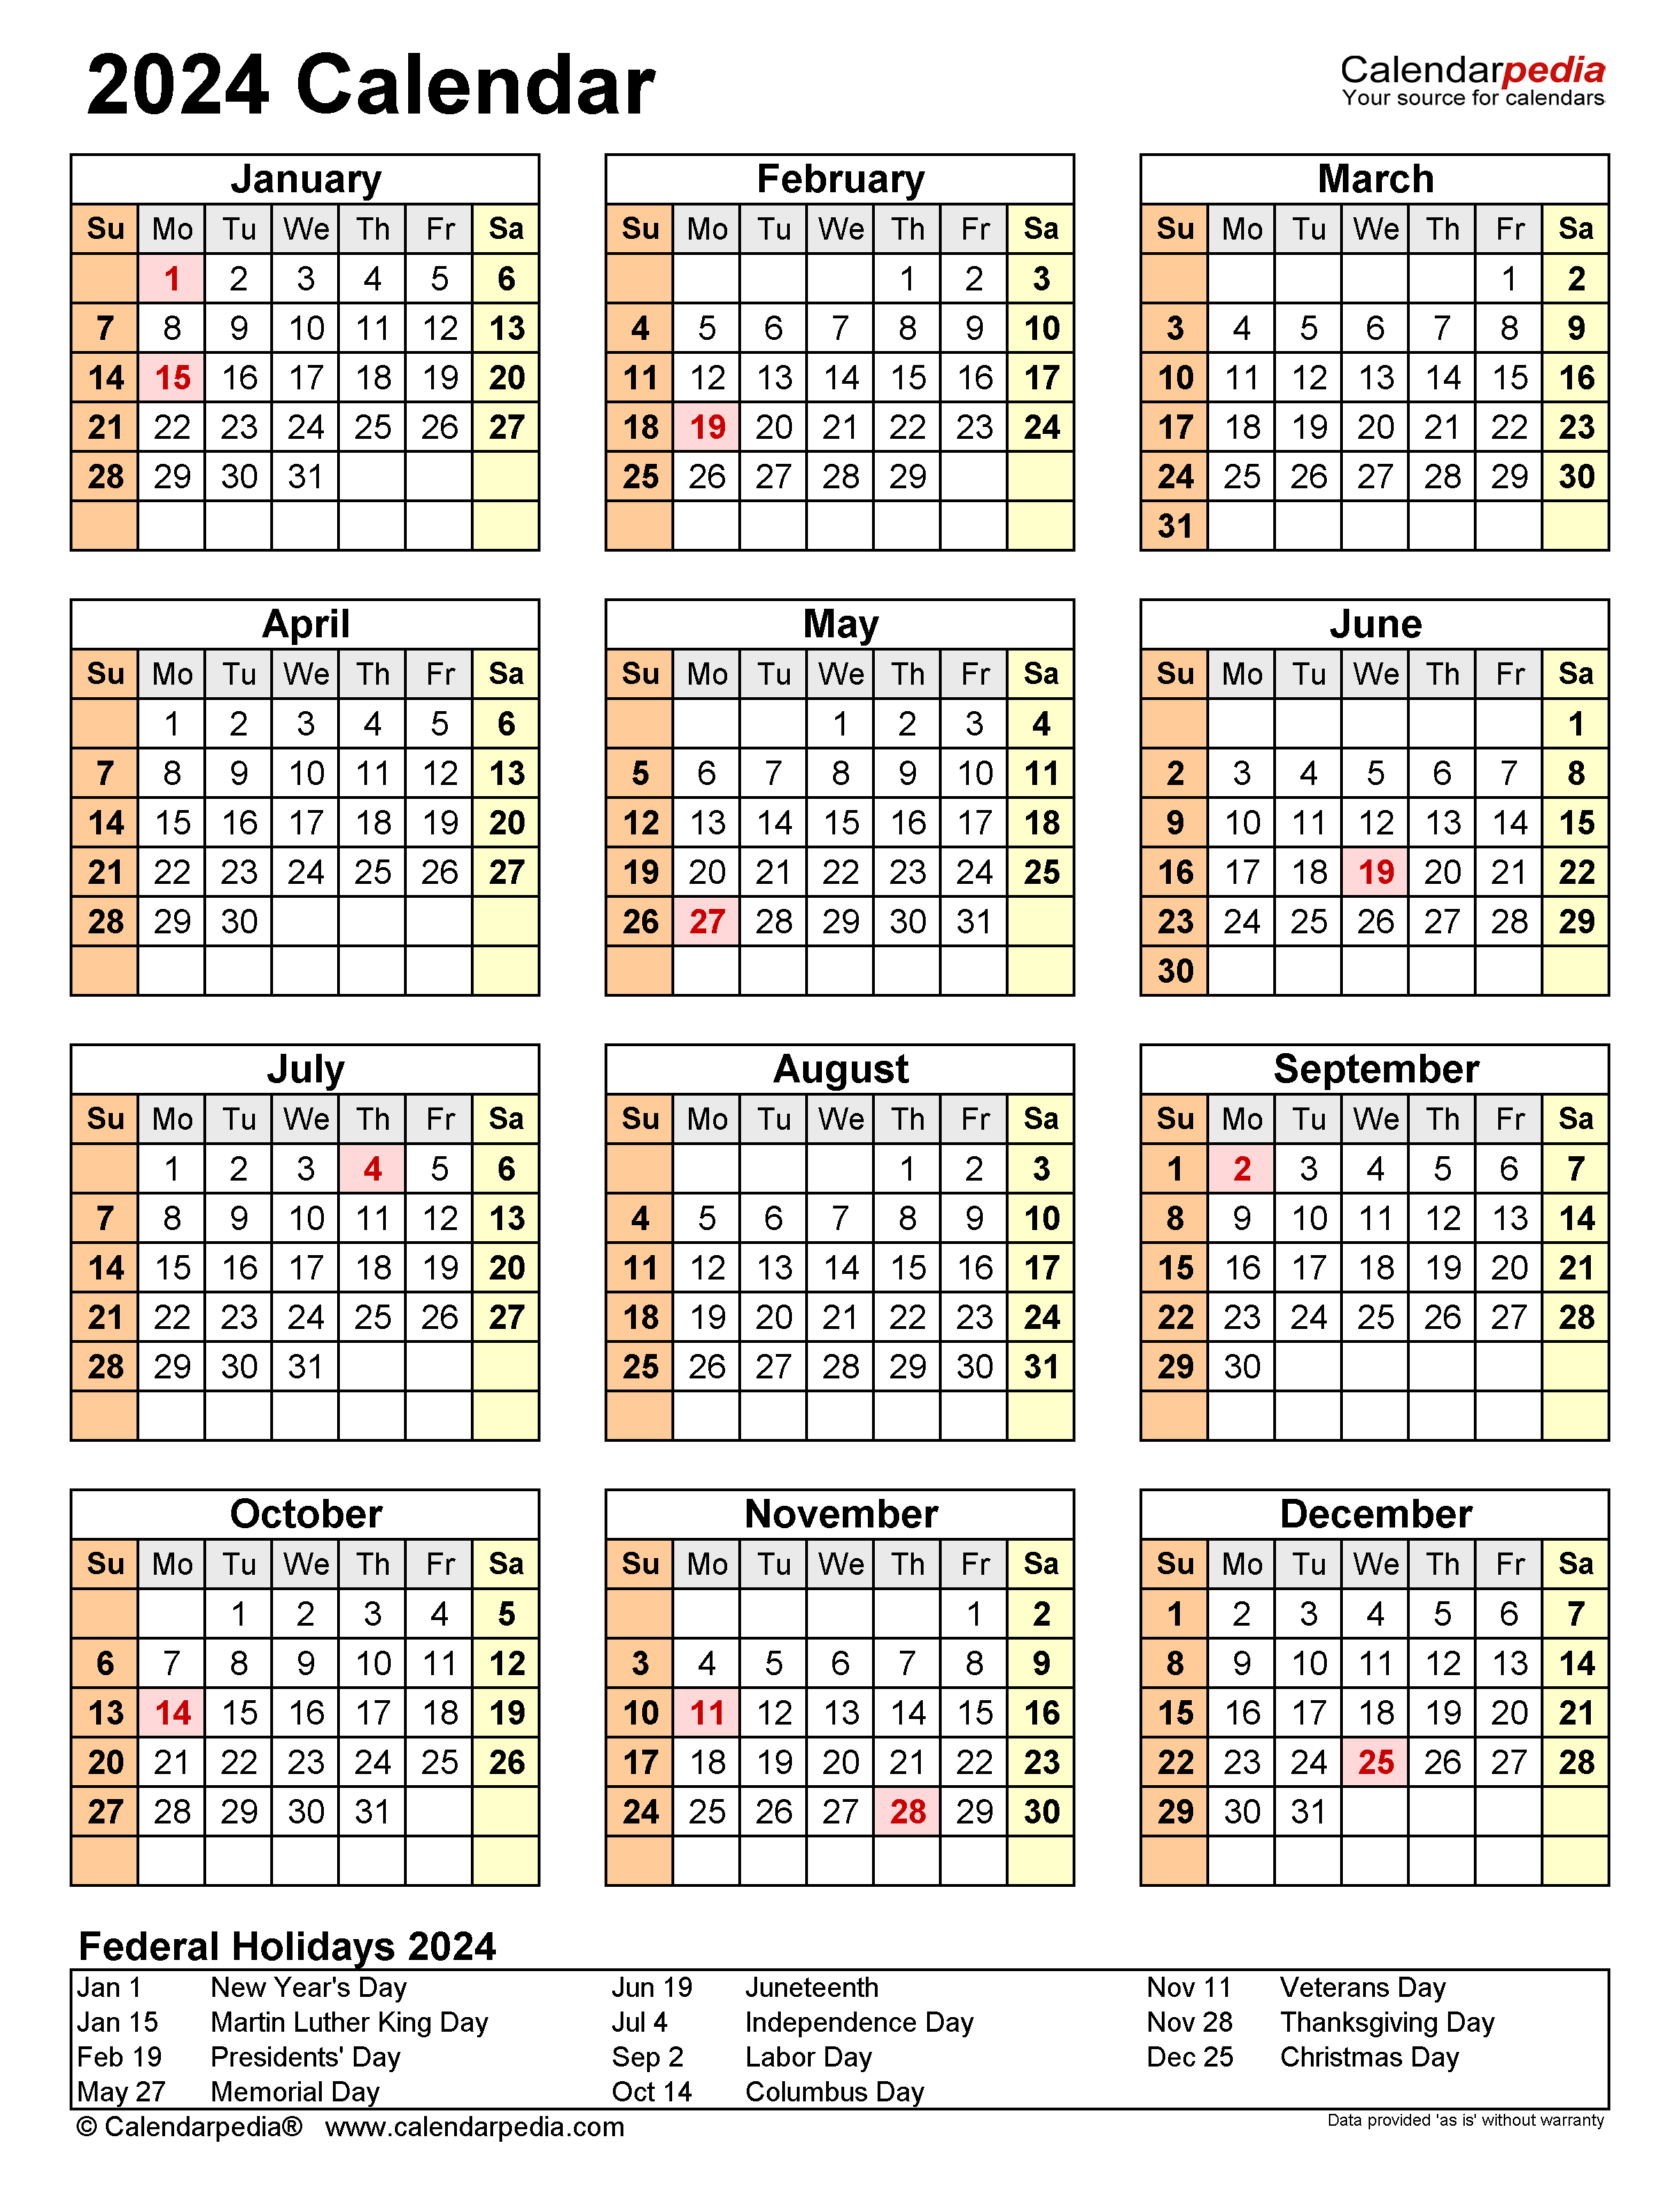 Free Printable 2024 Monthly Calendar With Holidays - Free Printable 2024 Calendar With Holidays Trinidad And Tobago